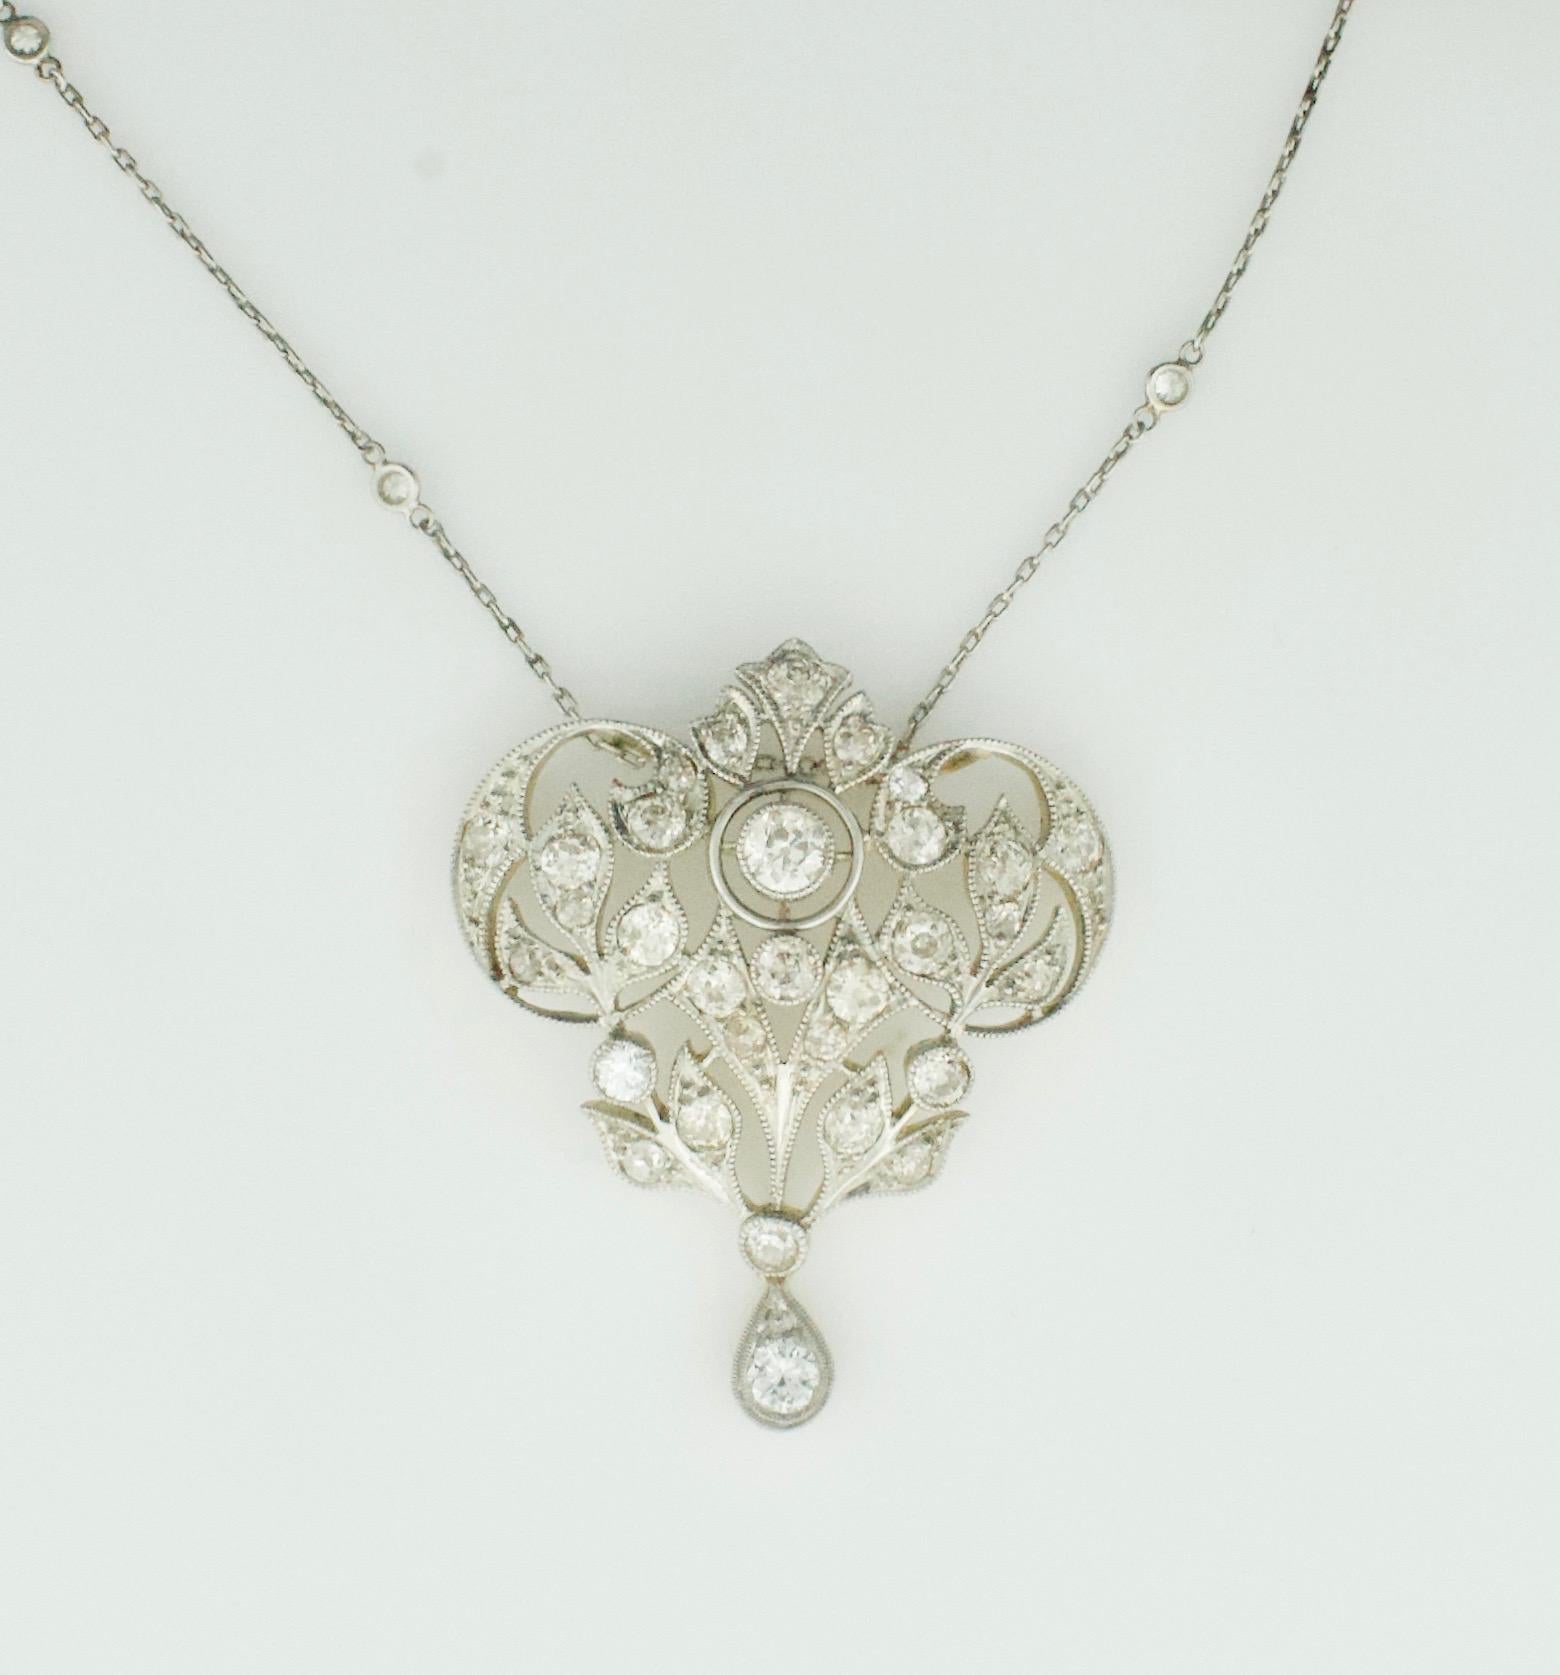 Edwardian Circa 1800's Diamond Platinum on 14k Yellow Gold Necklace 
43 Old European Cut Diamonds weighing 3.00 carats approximately [GHI VVS-SI1]
On a 16 inch White Gold Chain
